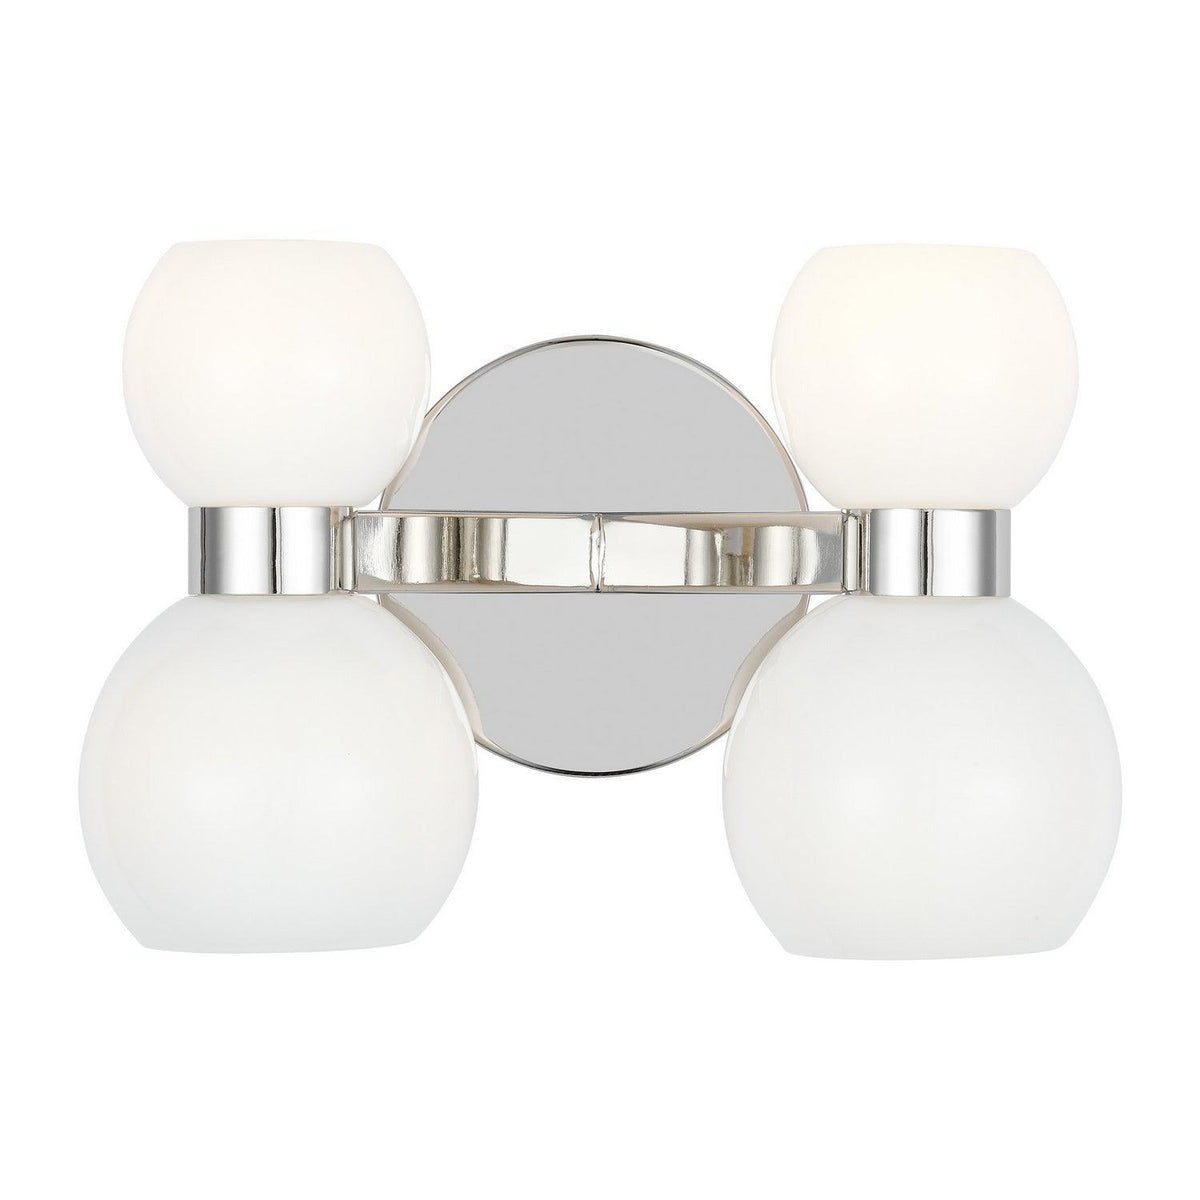 Visual Comfort Studio Collection - Londyn Wall Sconce - KSW1034PNMG | Montreal Lighting & Hardware